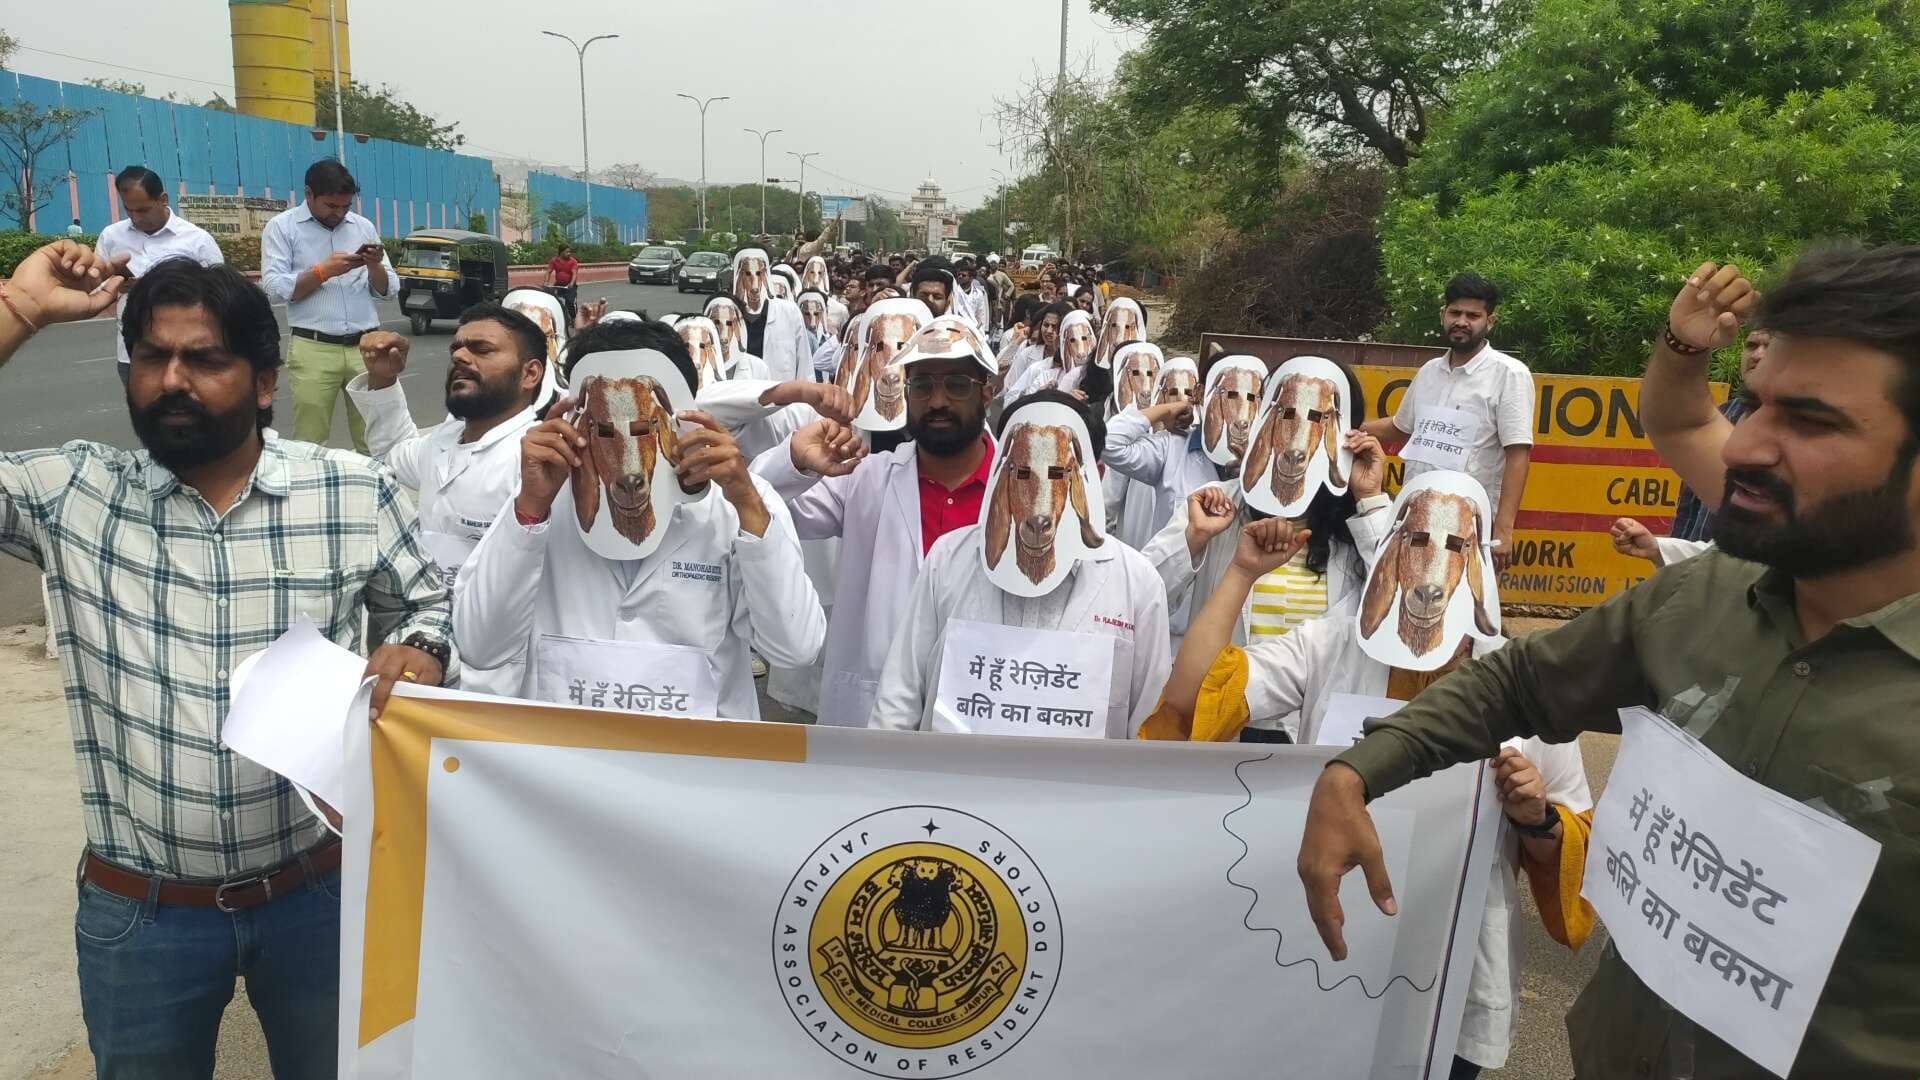 Goat rally held during doctor's strike